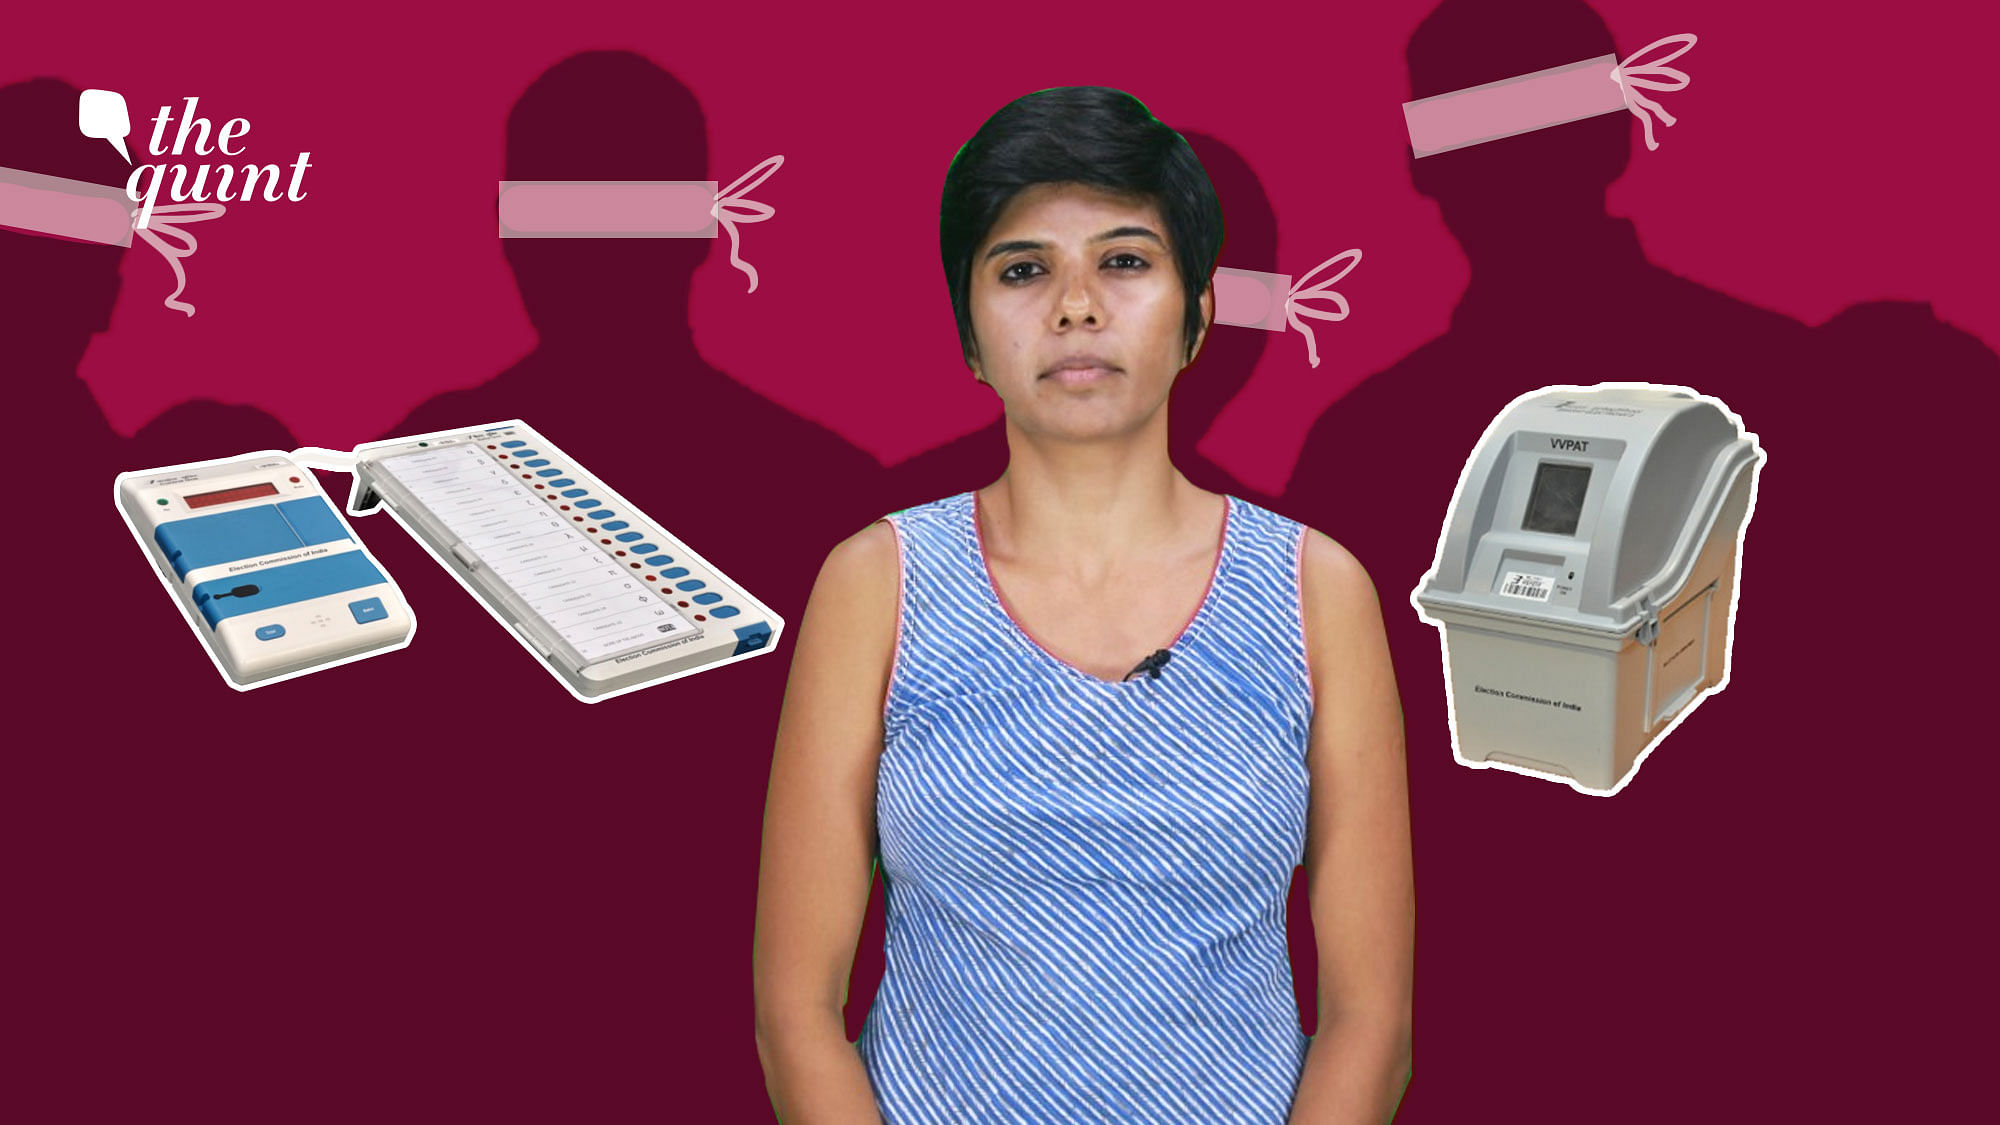 The Quint’s investigation reveals that due to technical glitch, the EVM-VVPAT are vulnerable to manipulation during elections. But the Election Commission of India is silent. Doesn’t it put our democracy at risk?